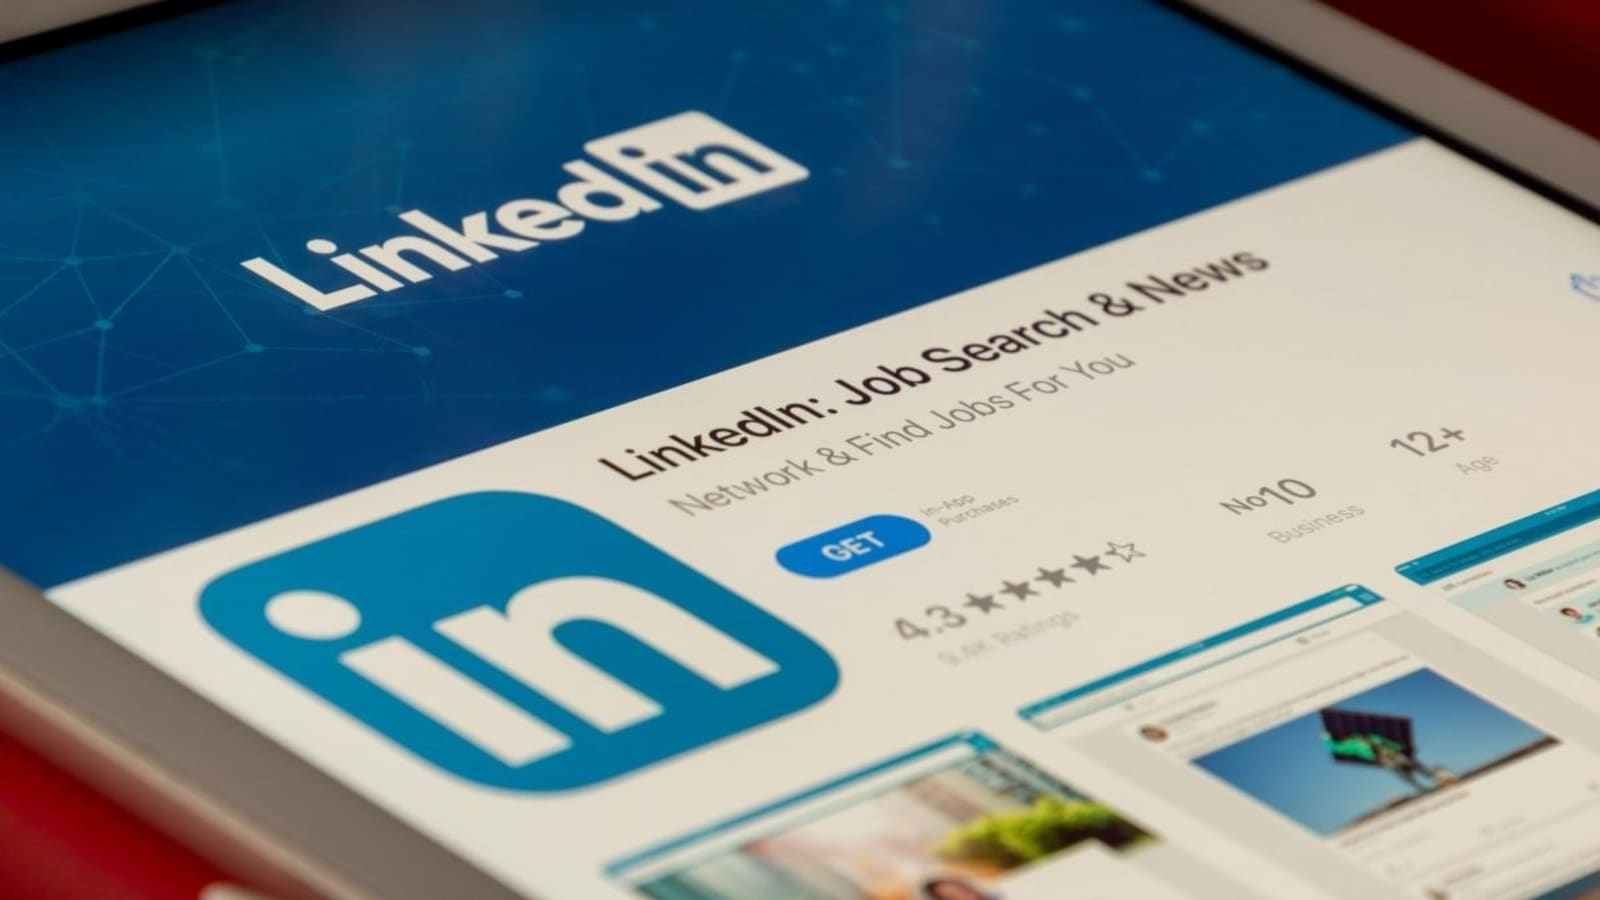 LinkedIn impact: One particular viral video clip bought this job seeker hundreds of job interview requests